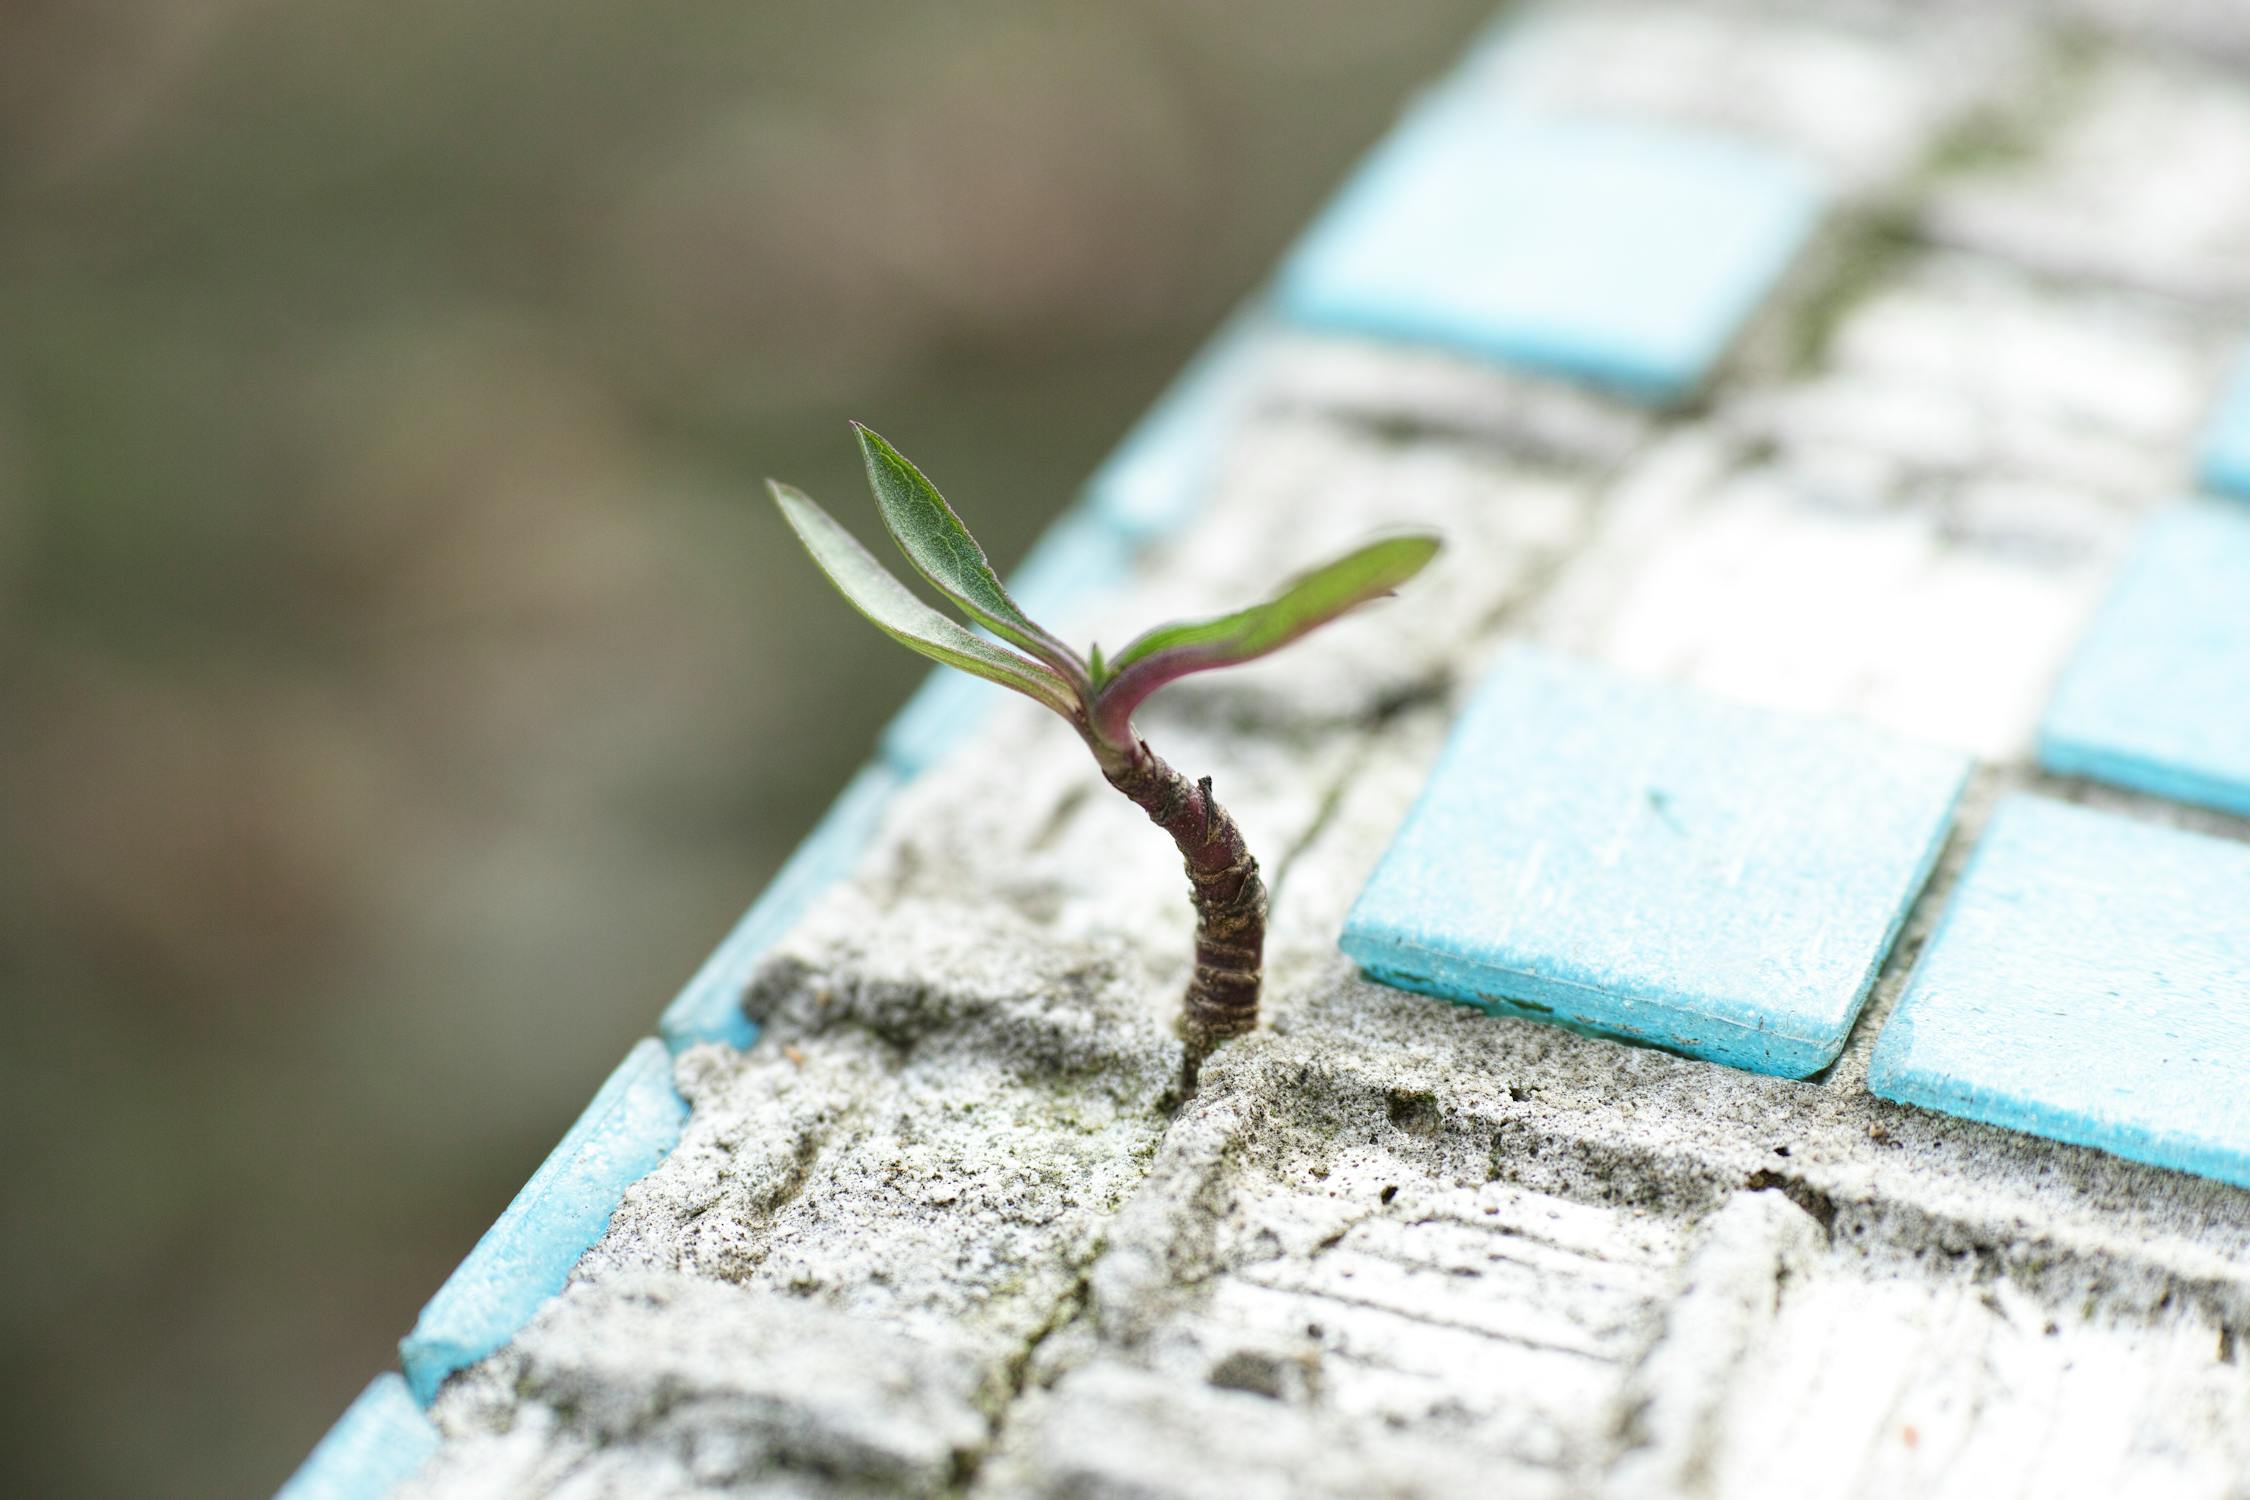 Growth Photo by Engin Akyurt from Pexels: https://www.pexels.com/photo/green-leafed-plant-on-sand-1438404/